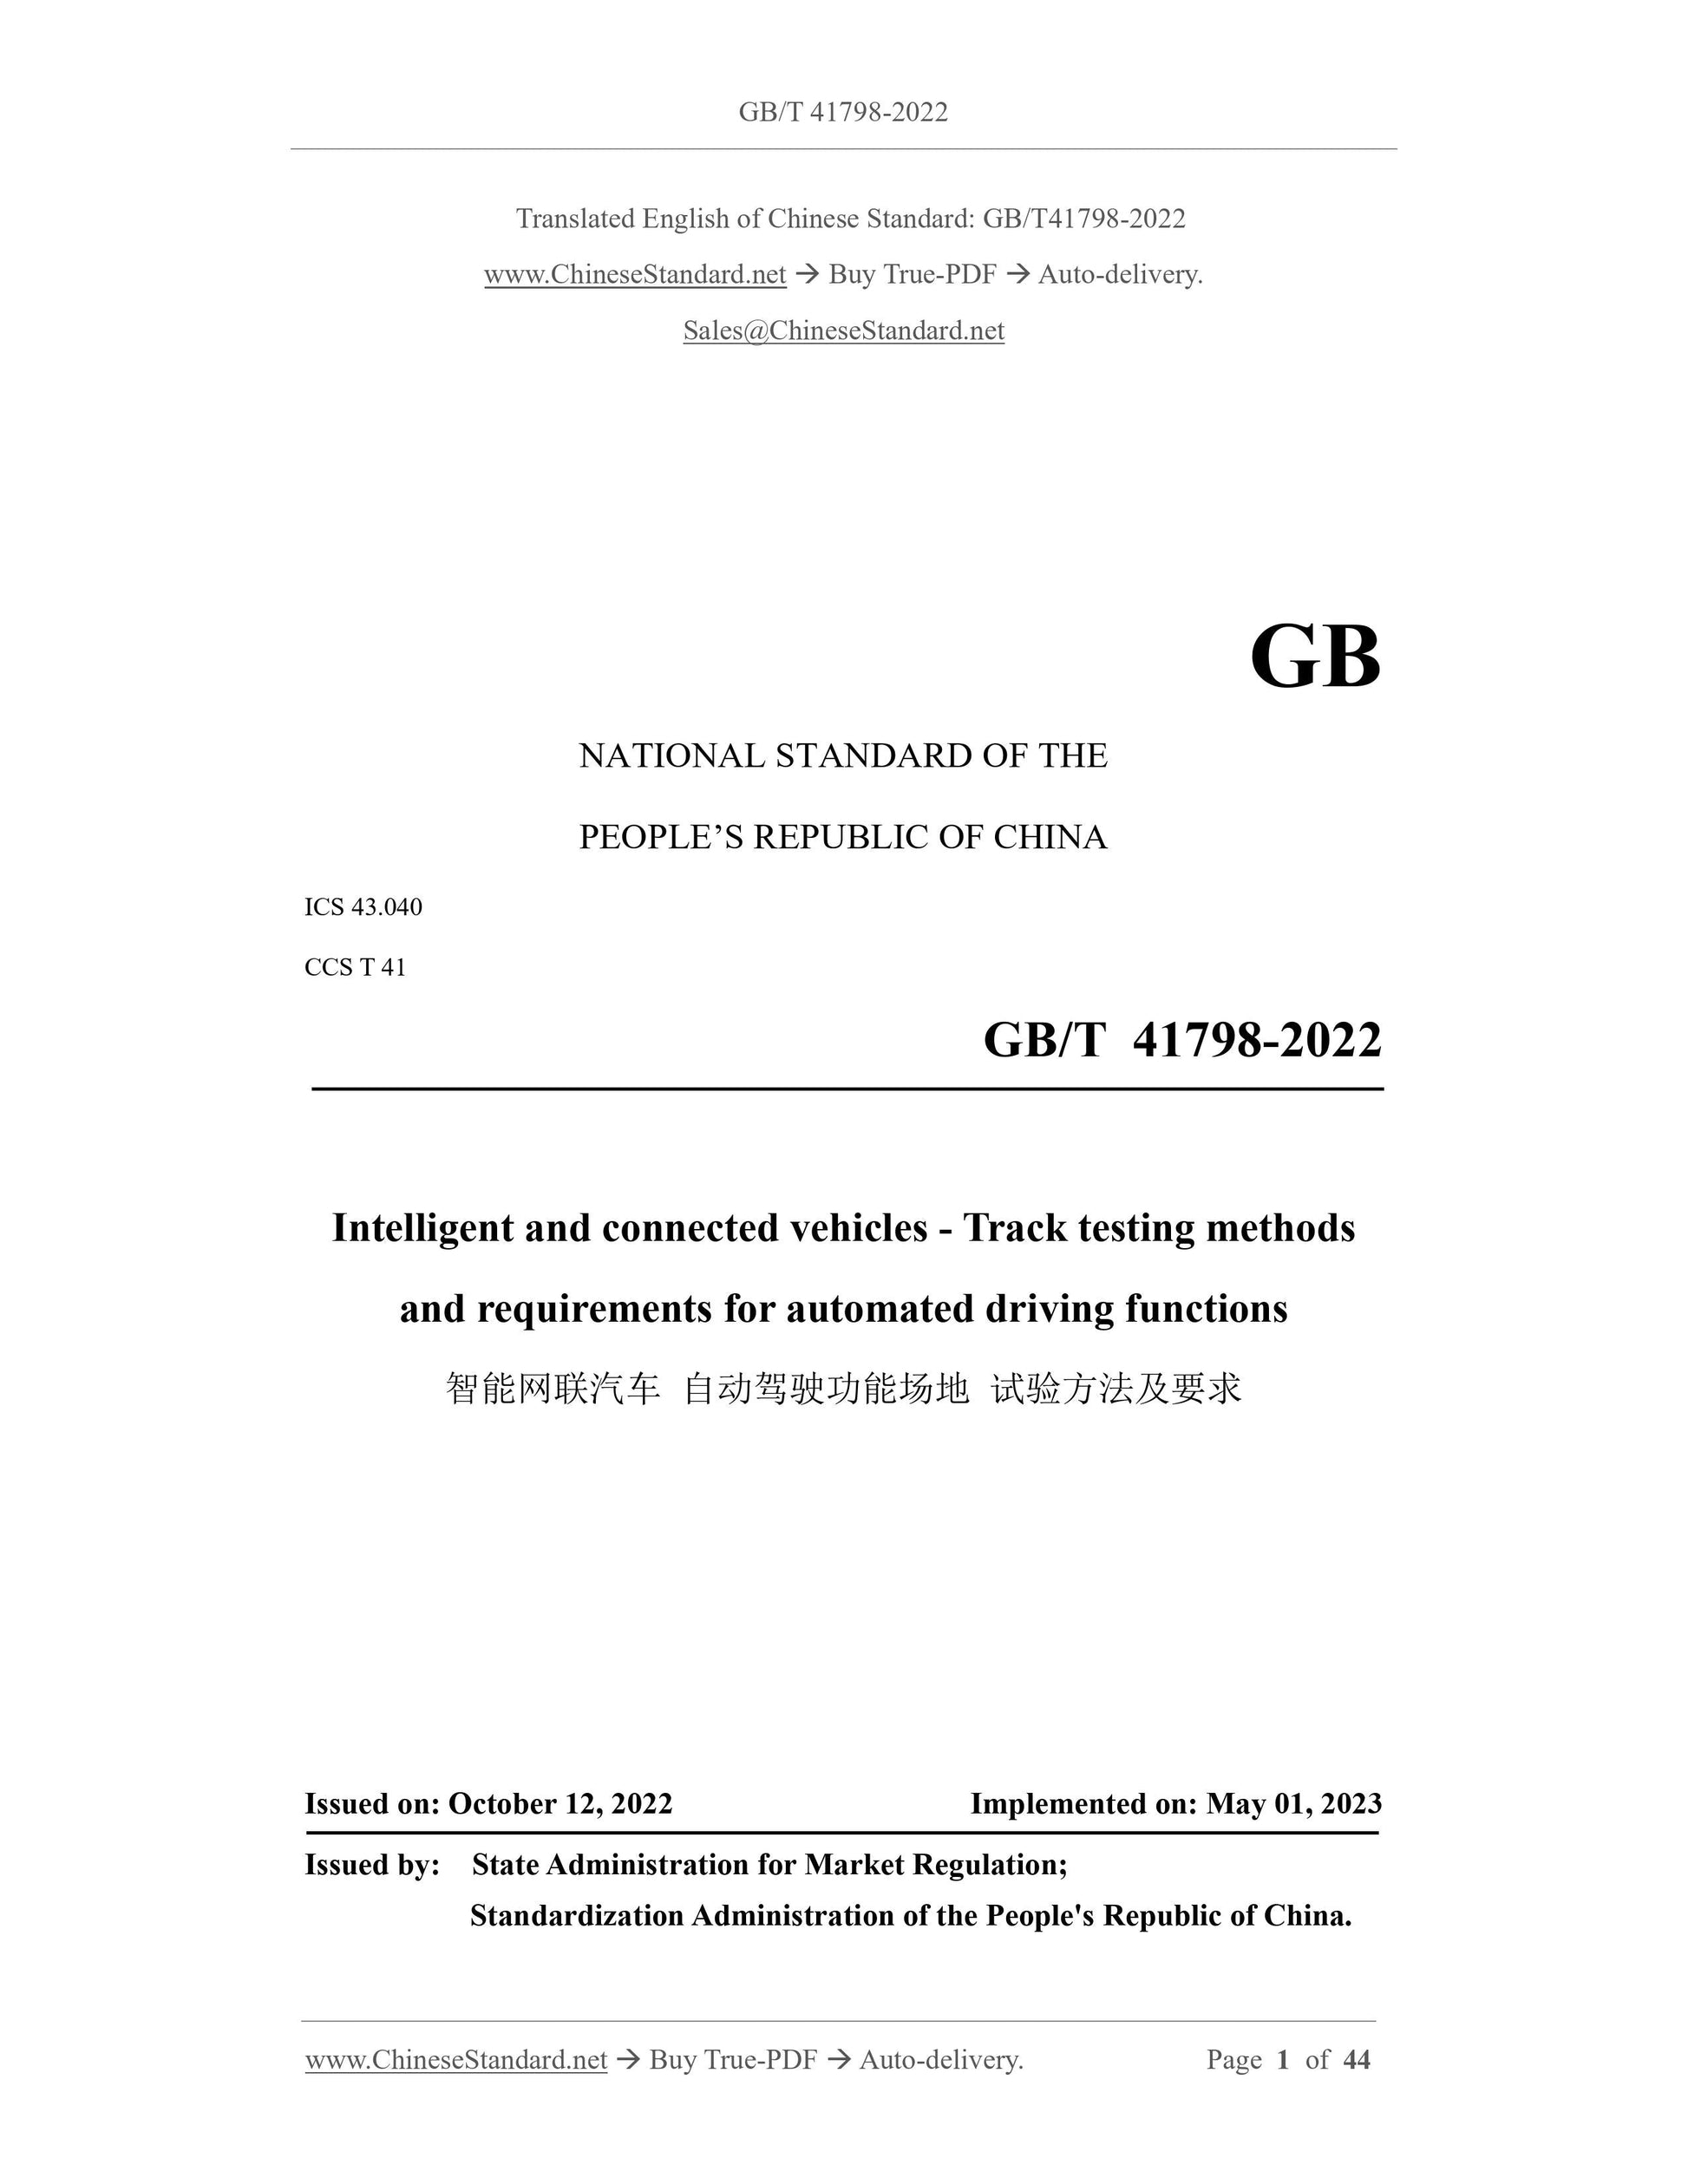 GB/T 41798-2022 Page 1